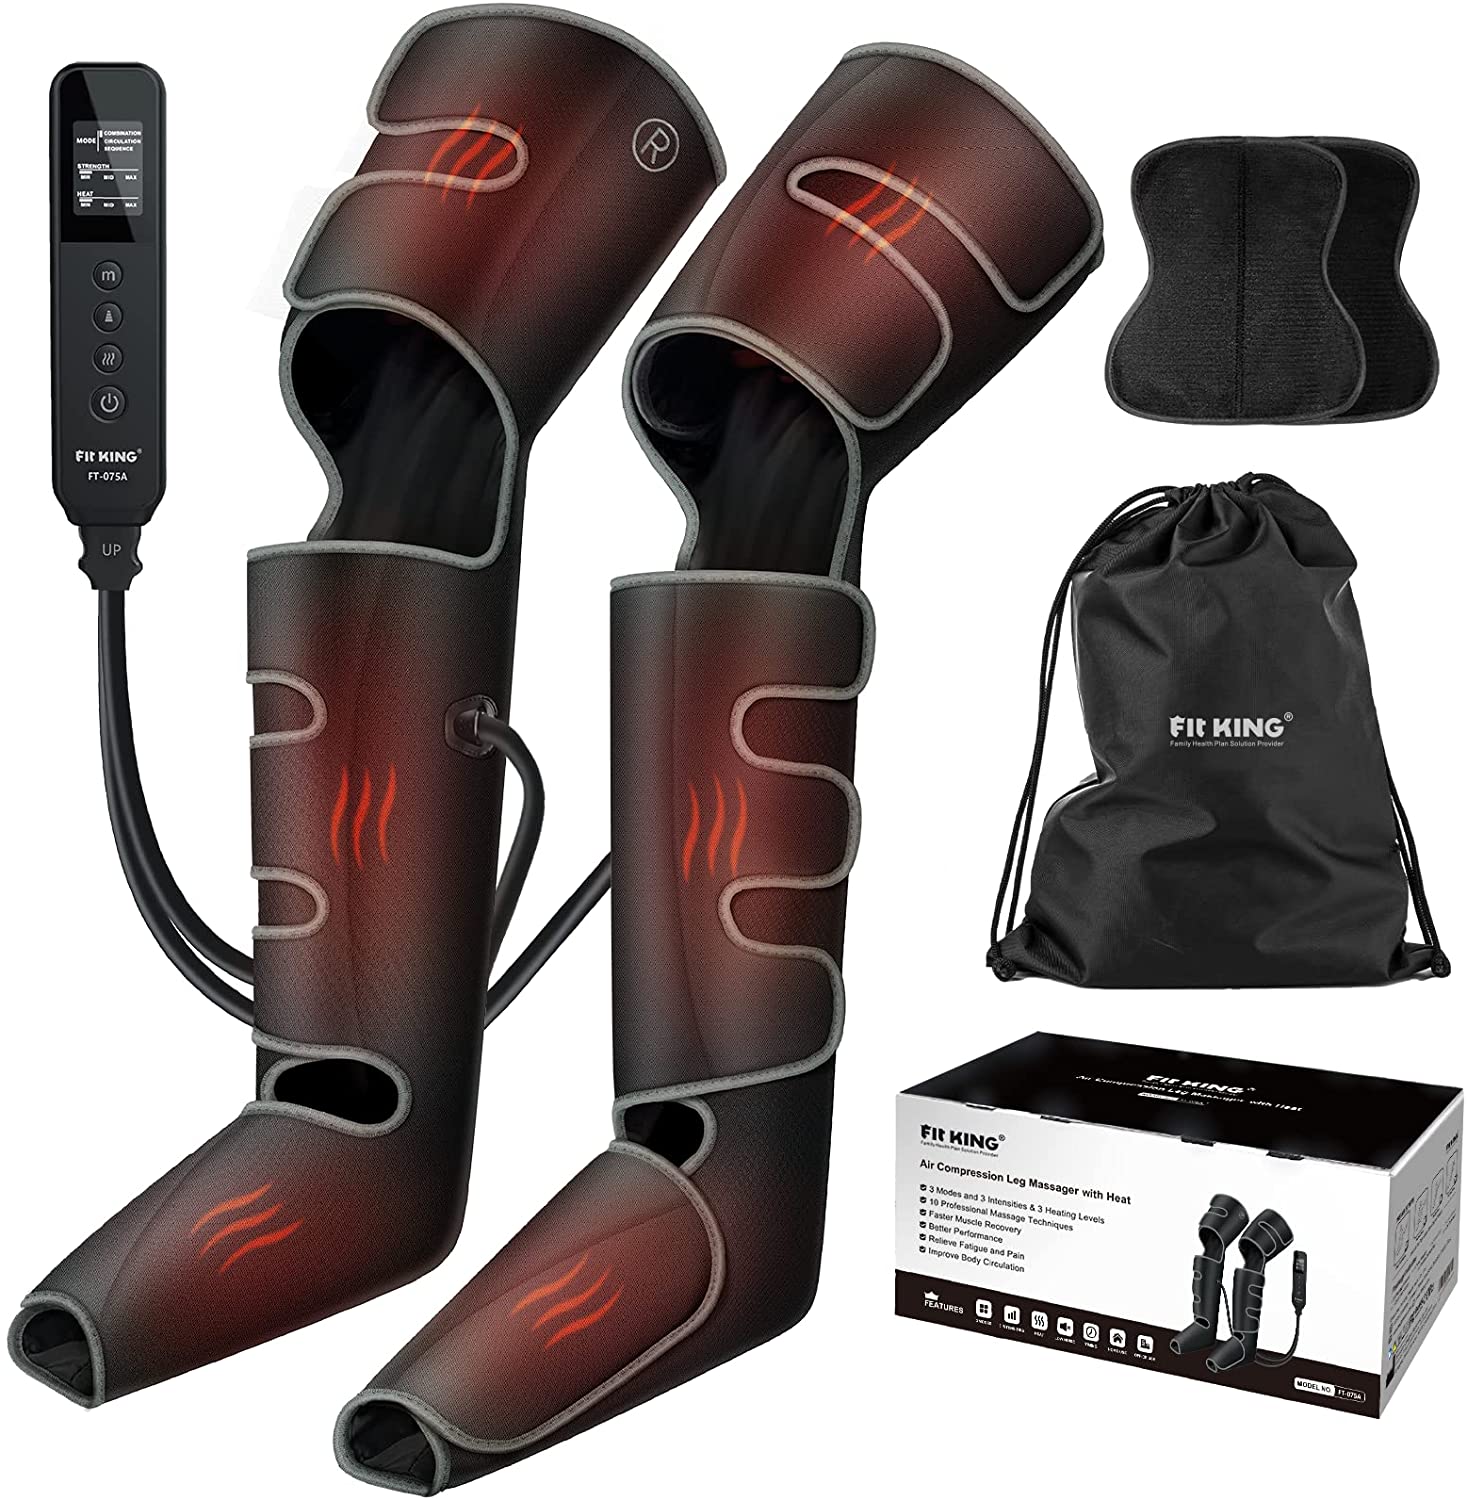 FIT KING Full Leg Massager with Advanced Heat Therapy | FT-075A